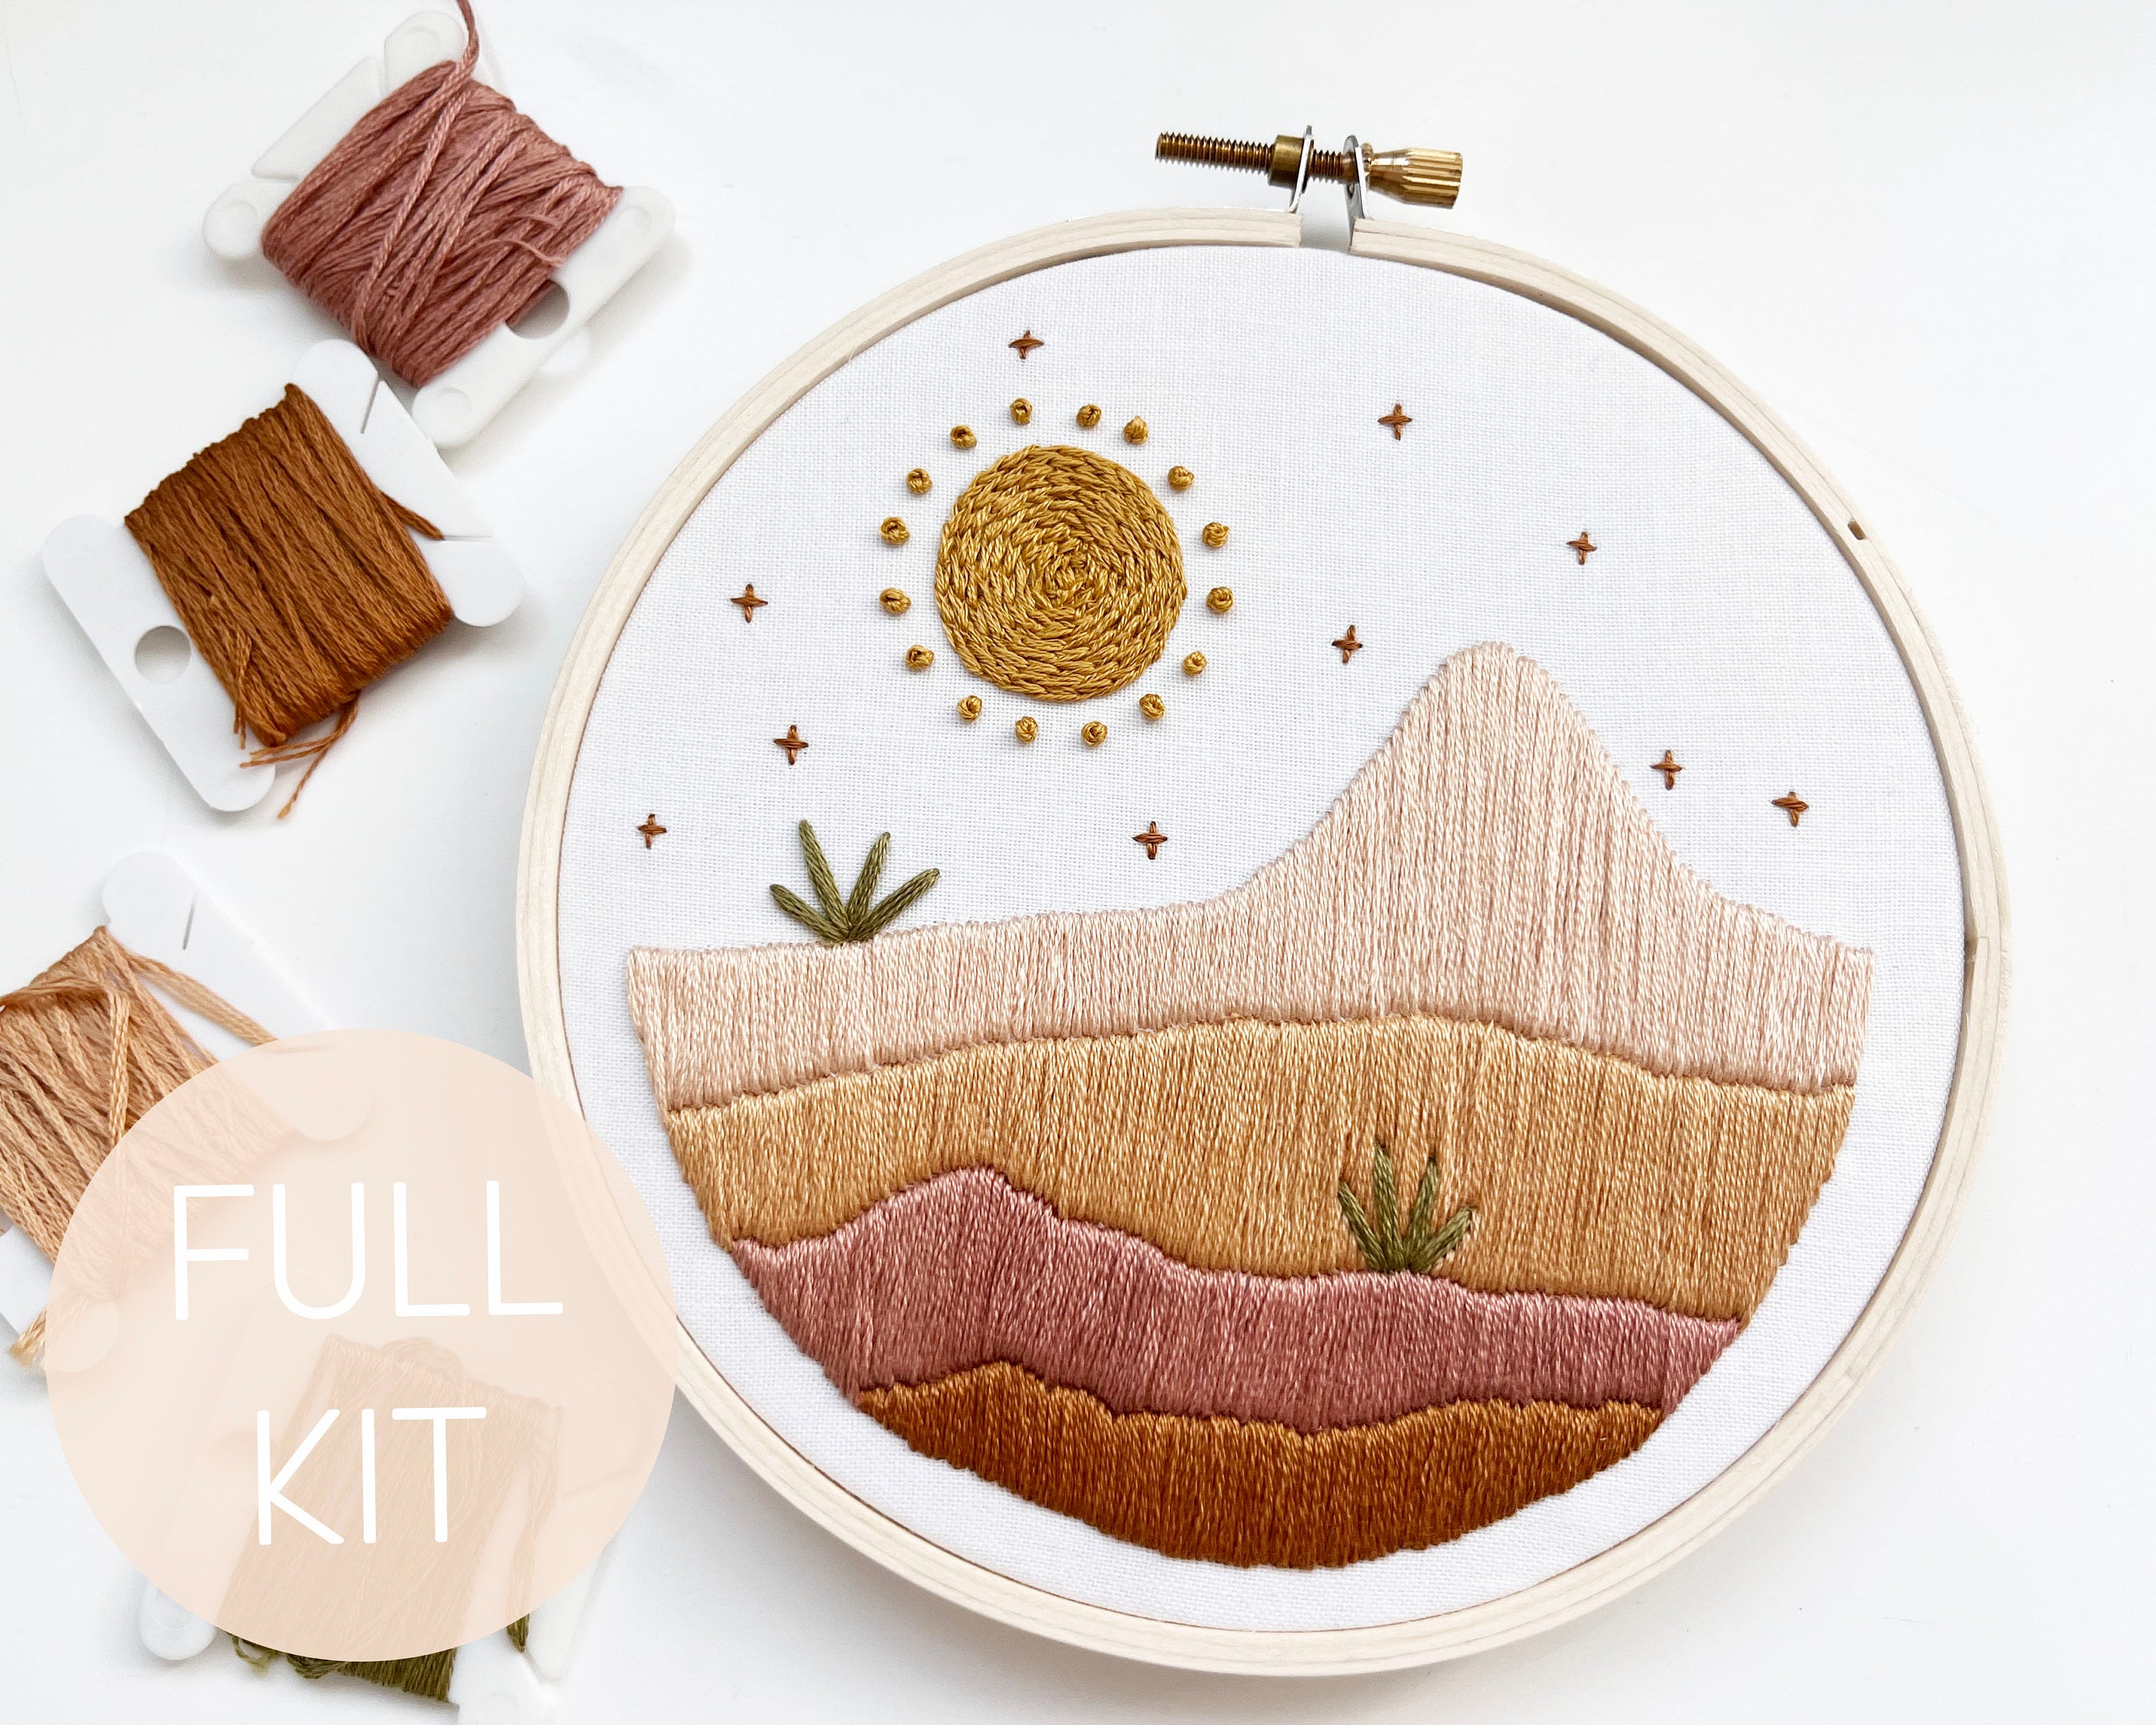 Sunset Embroidery Kit, Craft Kit for Beginners, Paisley Hoop Art, Modern Needlework  Set, Nature Lovers Gift, DIY Embroidery Pattern 